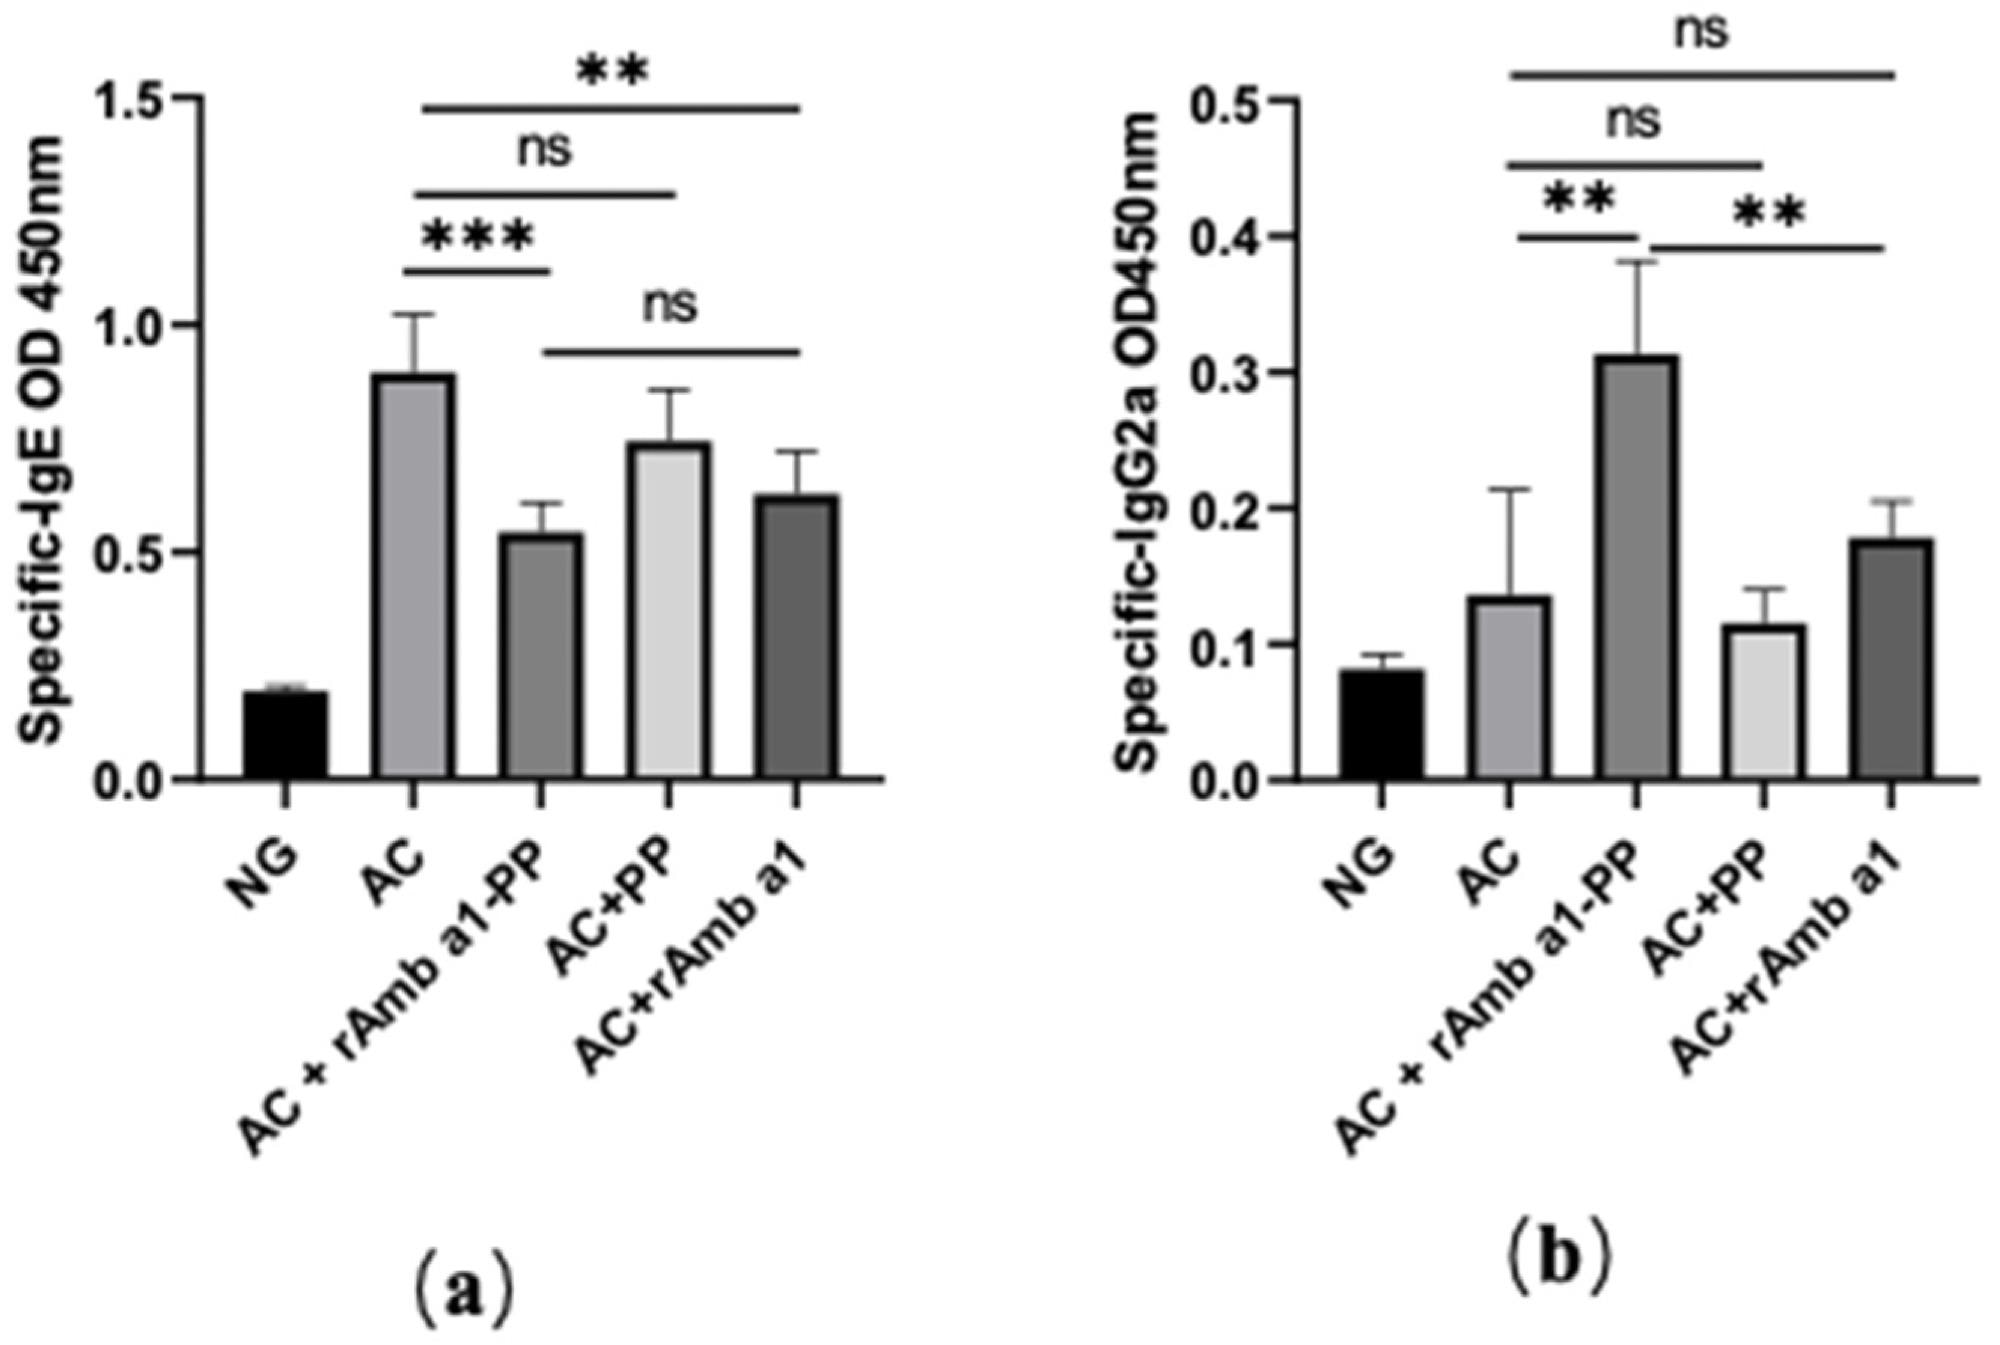 Serum-specific IgE (a) and IgG2a (b) in mice in each group. The data are shown as mean ± SD from five individual mice (*** p < 0.001, ** p < 0.01, ns: no significant difference). Abbreviations: NG, naive group; AC, allergic conjunctivitis group; AC + rAmb a 1-PP, allergic conjunctivitis + rAmb a 1-PLGA-PEG treatment group; AC + PP, allergic conjunctivitis + PLGA-PEG treatment group; AC + rAmb a 1, allergic conjunctivitis + rAmb a 1 treatment group.